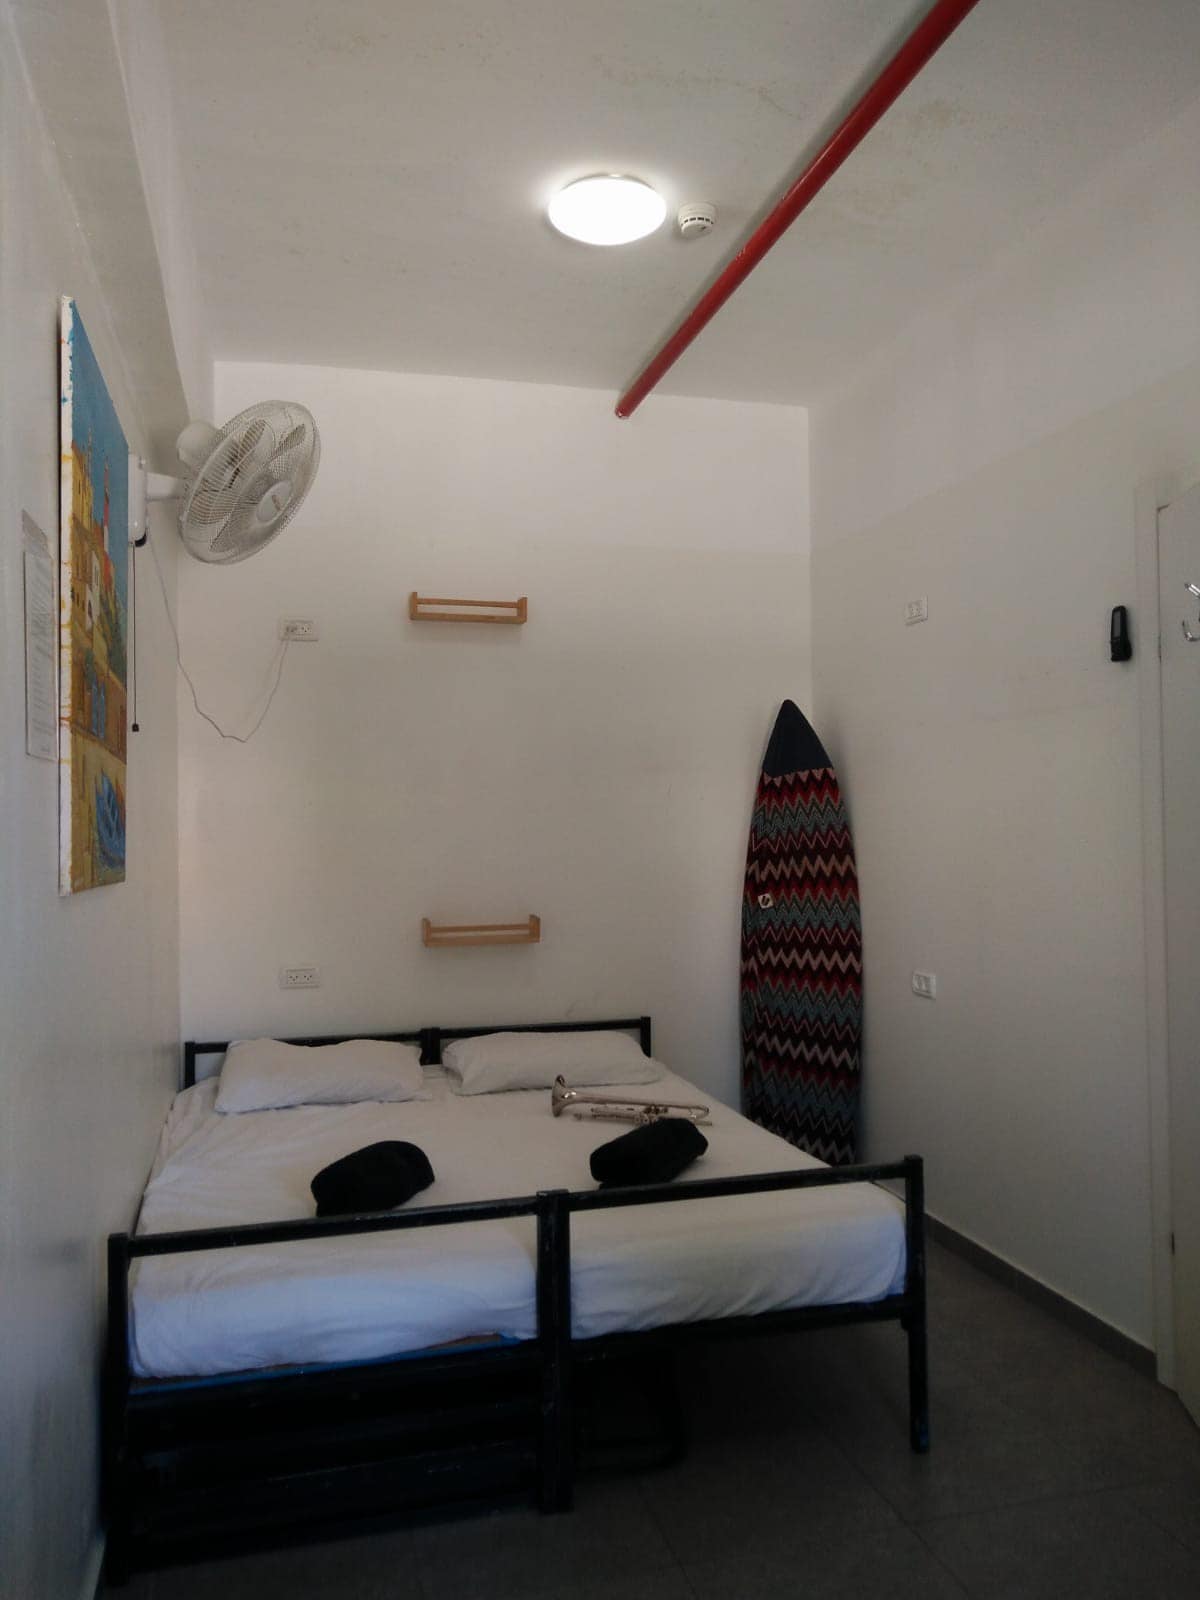 Private room, shared ensuit, in co-living house